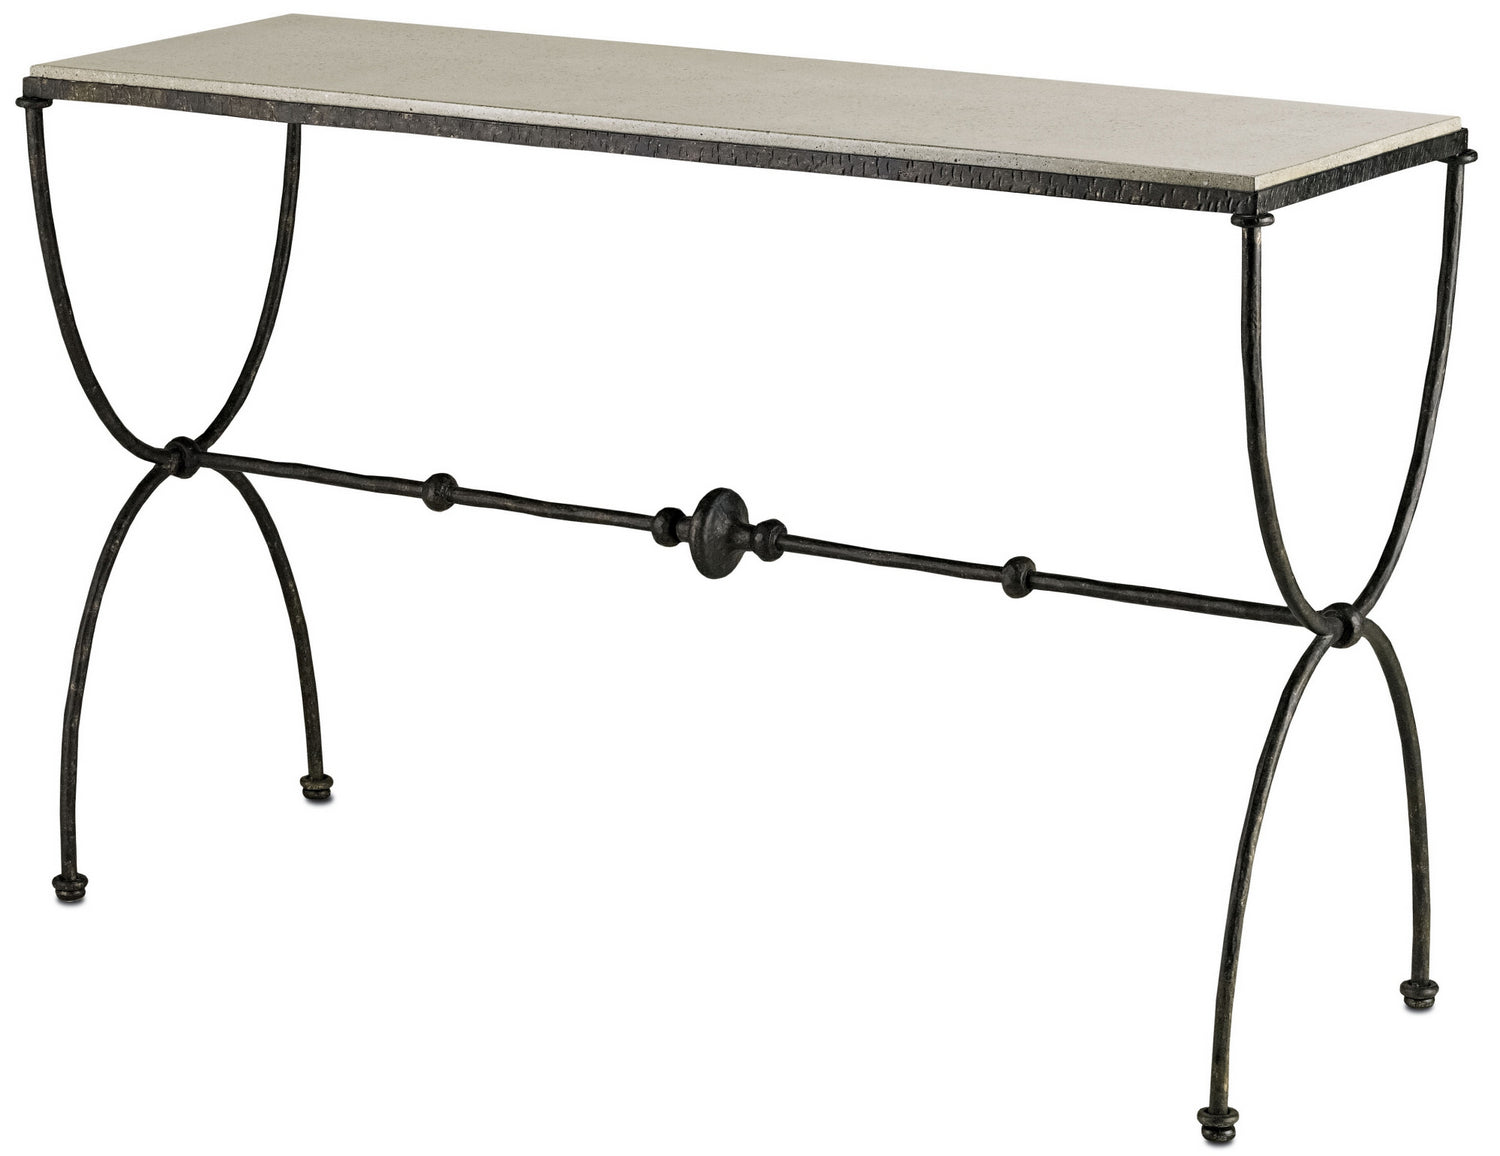 Console Table from the Agora collection in Rustic Bronze/Polished Concrete finish